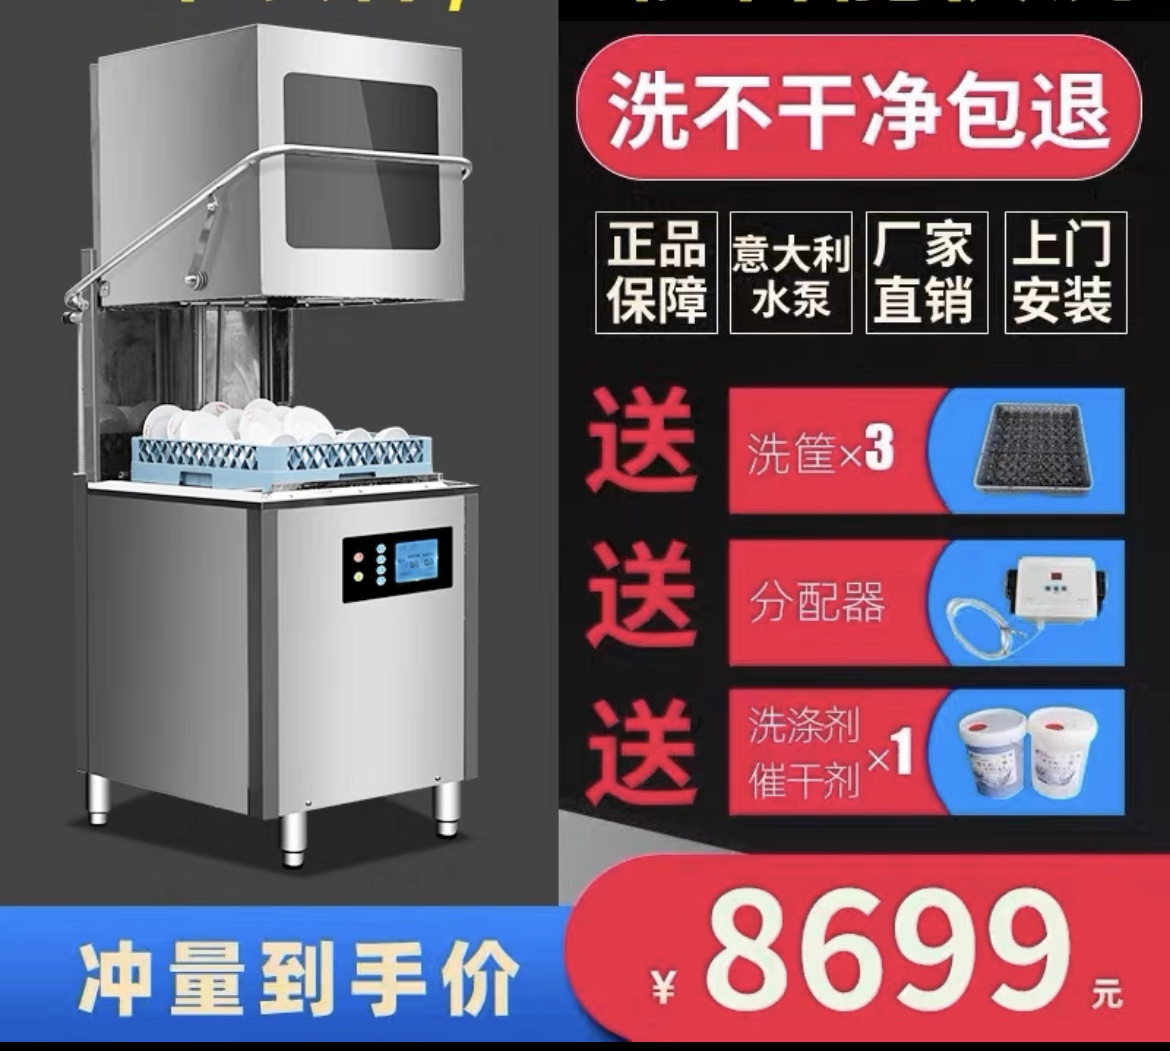 Qile Dishwasher Commercial Hotel Small Hotel Canteen Restaurant Automatic Uncover Dishwasher Cup Washing Machine Equipment (1627207:18817023689:Color classification:Double pump A2 model 380V 9.8 kW)